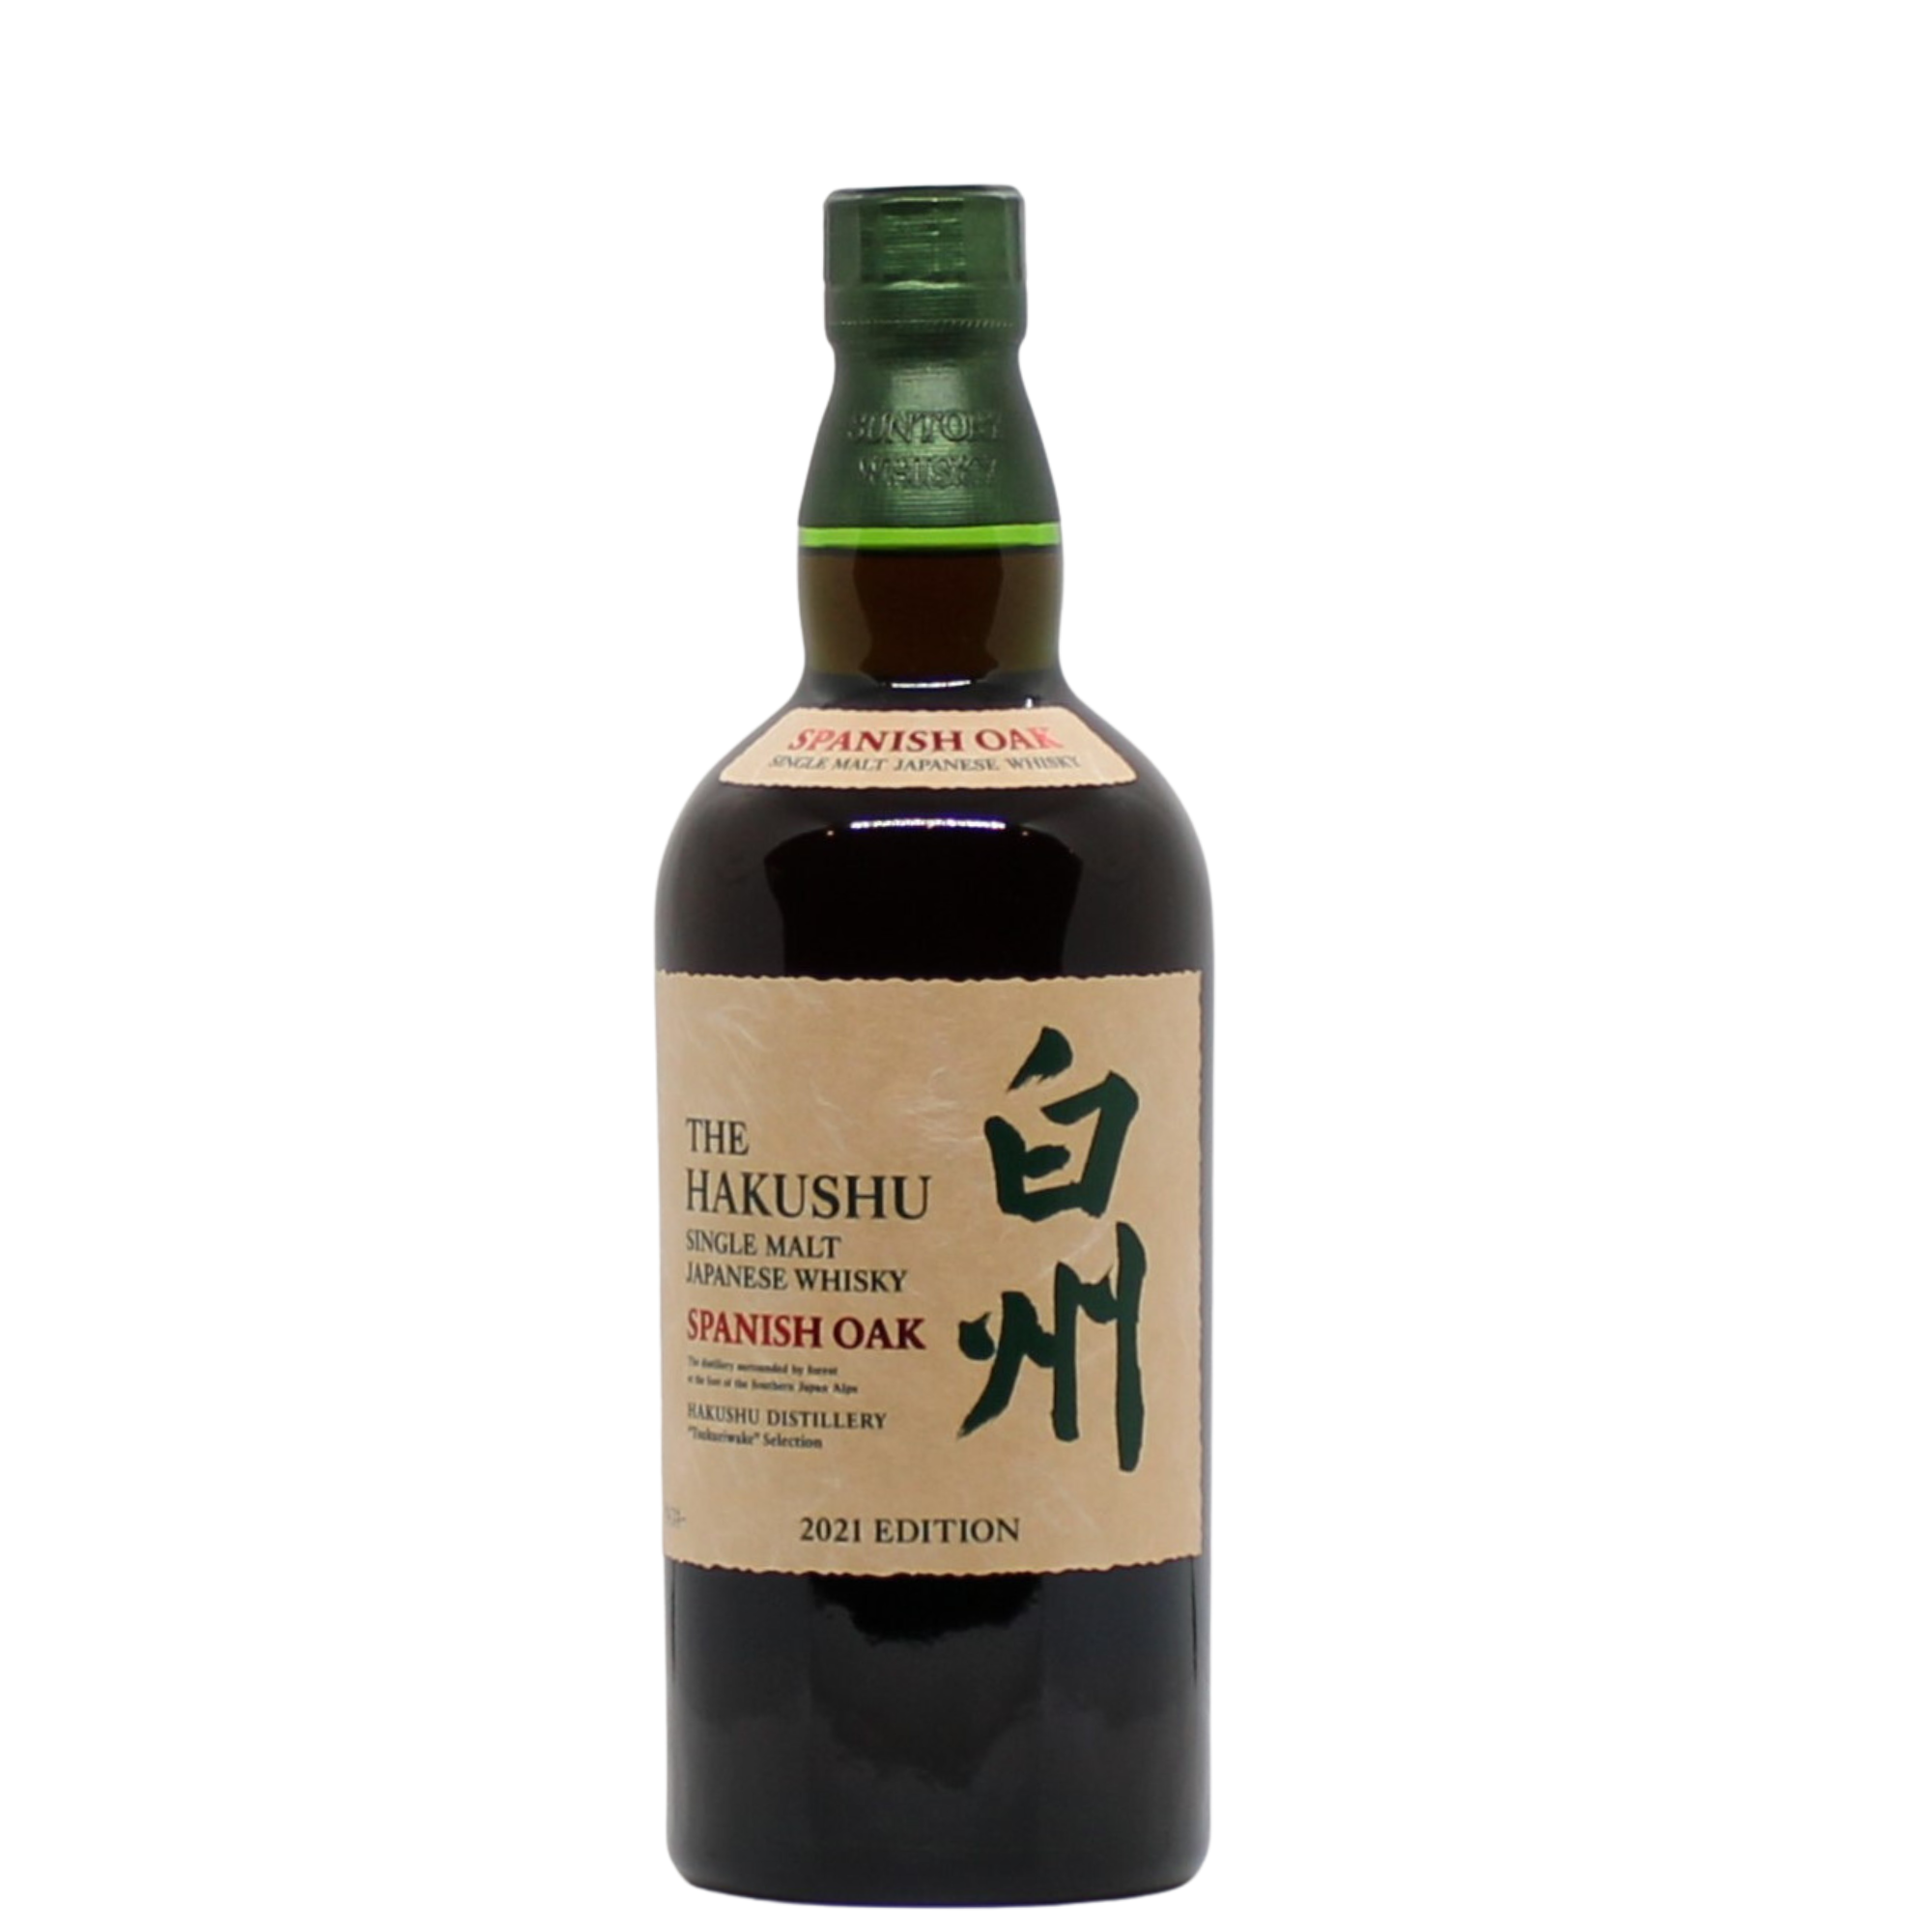 A limited release of 2021 and part of the Tsukuriwake selection, this Hakushu bottling has been matured in Spanish Oak. Only 300 bottles were made available in Japan followed by an undisclosed number for worldwide markets. Nose: Cacao, Manuka Honey, Dark Chocolate. Palate: Soft sweetness interlaced with a hint of dark chocolate bitterness. Finish: smooth and again some dark chocolate notes.